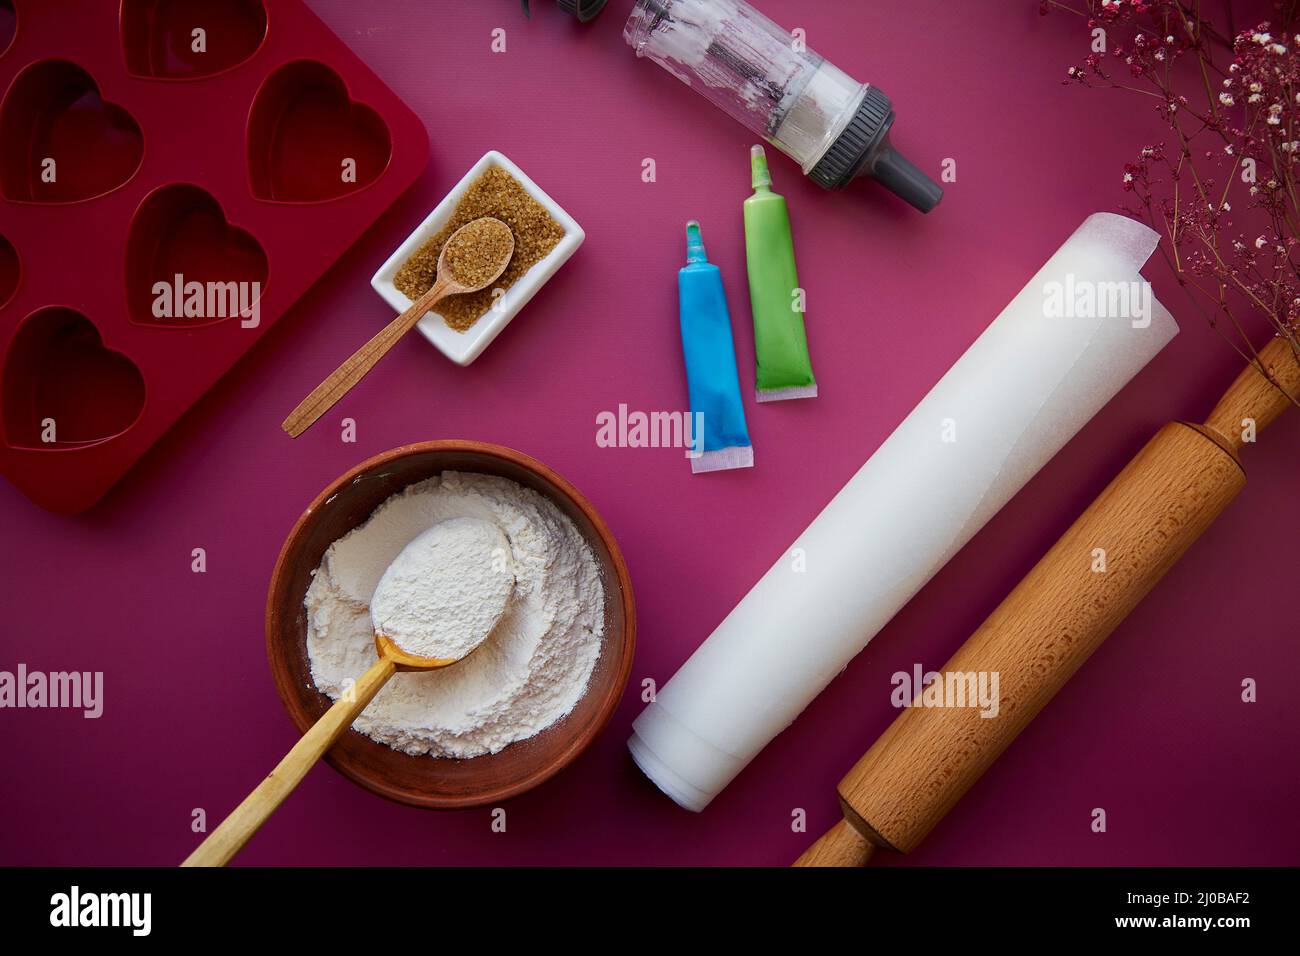 Baking tools complete with heart-shaped silicone mold, rolling pin, confectionery syringe, glaze, flour, sugar. View from above. Stock Photo